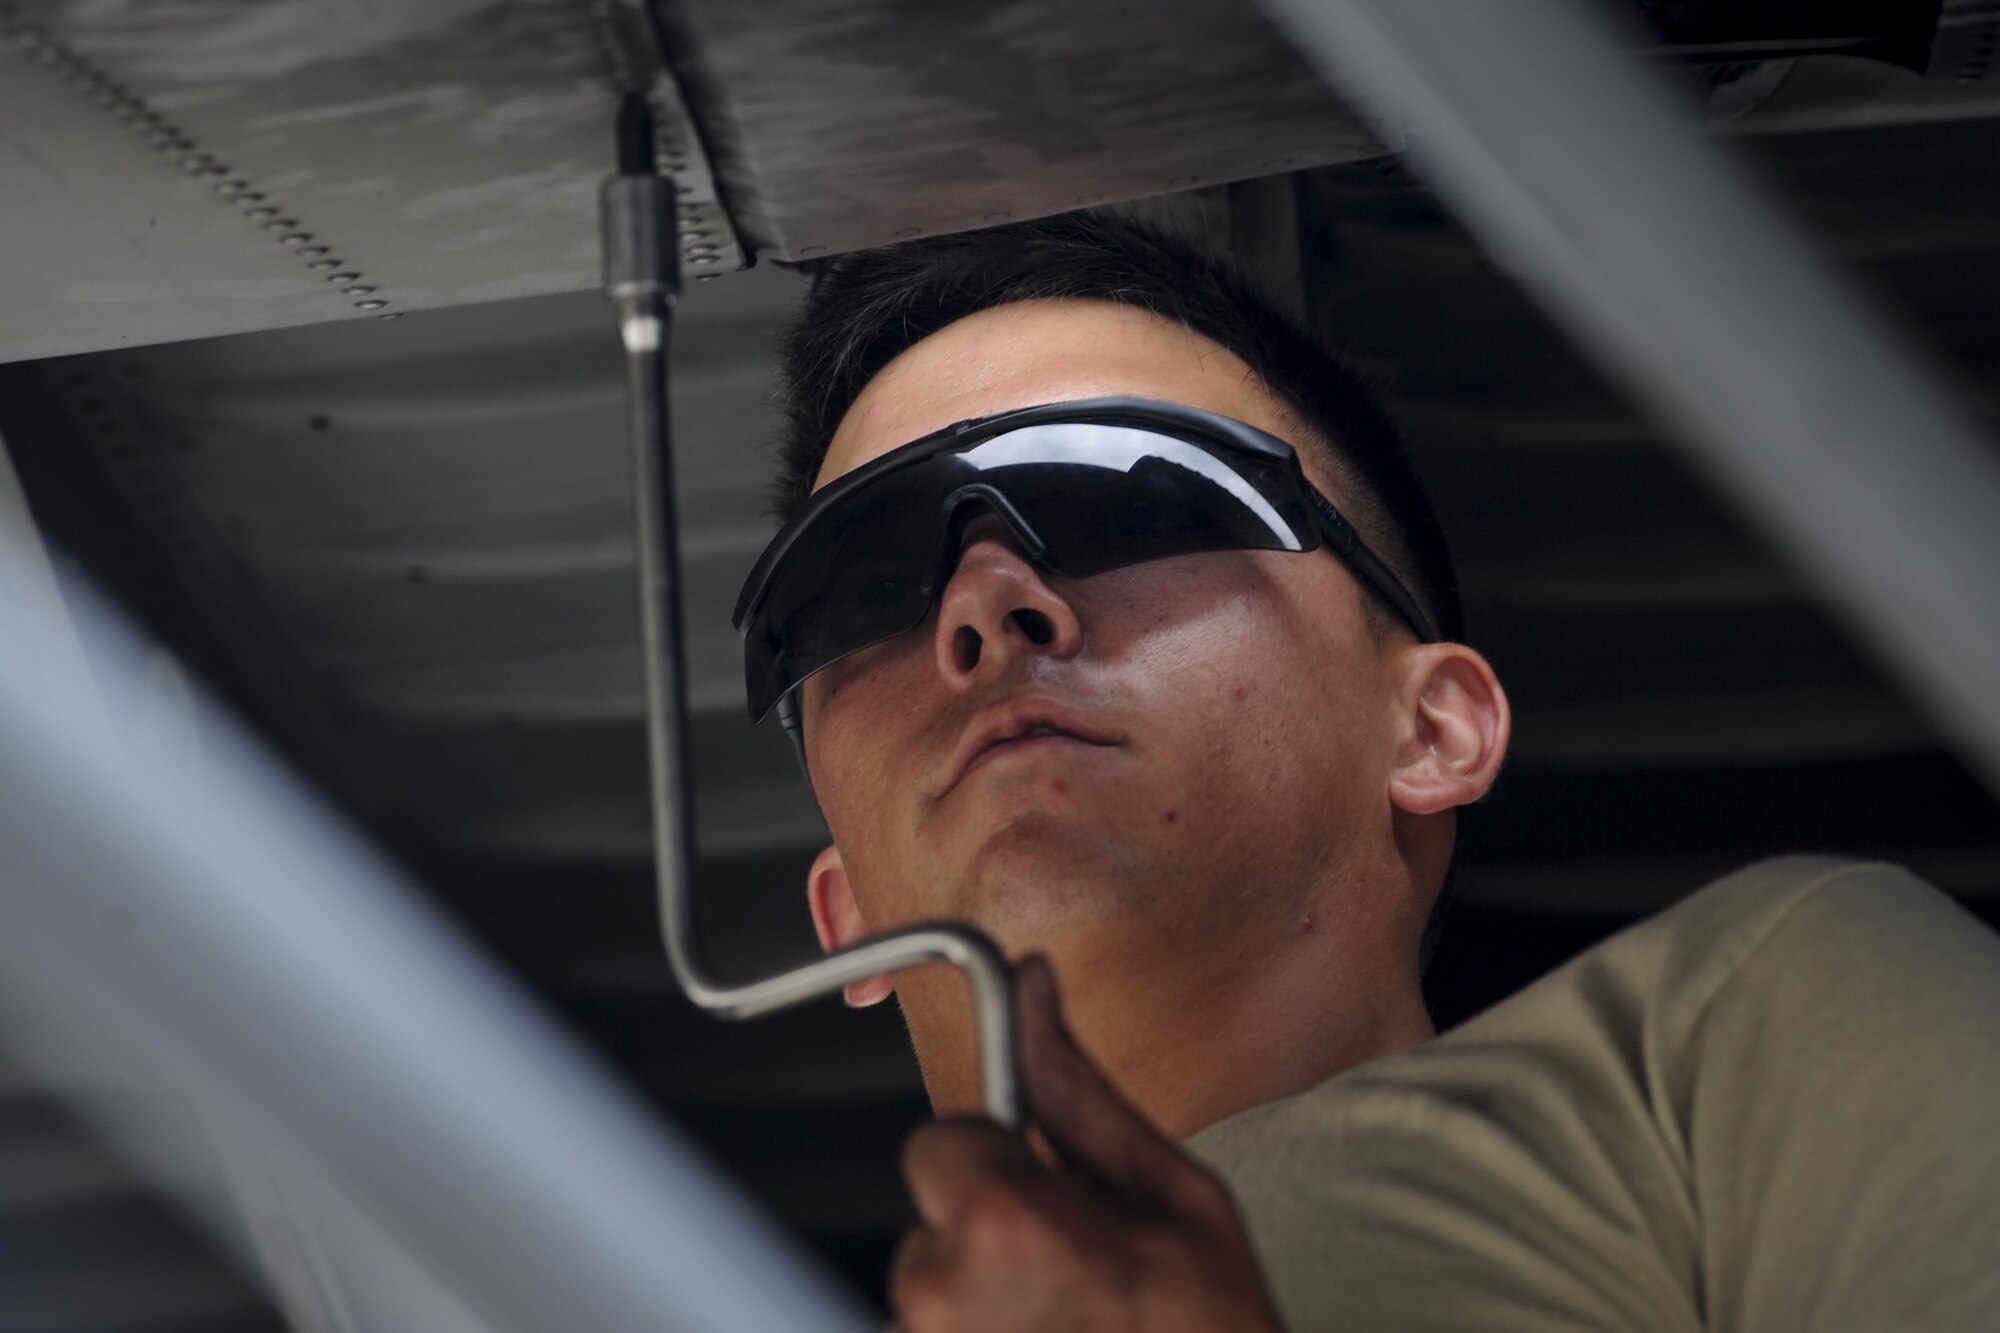 Airman 1st Class Daniel Goerdt, a crew chief with the 4th Aircraft Maintenance Unit, installs a flat baffle into the wing of an AC-130U Spooky gunship at Hurburt Field, Fla., May 19, 2017. Flat baffles are replaced on wings of aircraft to improve in-flight aerodynamics. (U.S. Air Force photo by Airman 1st Class Dennis Spain)